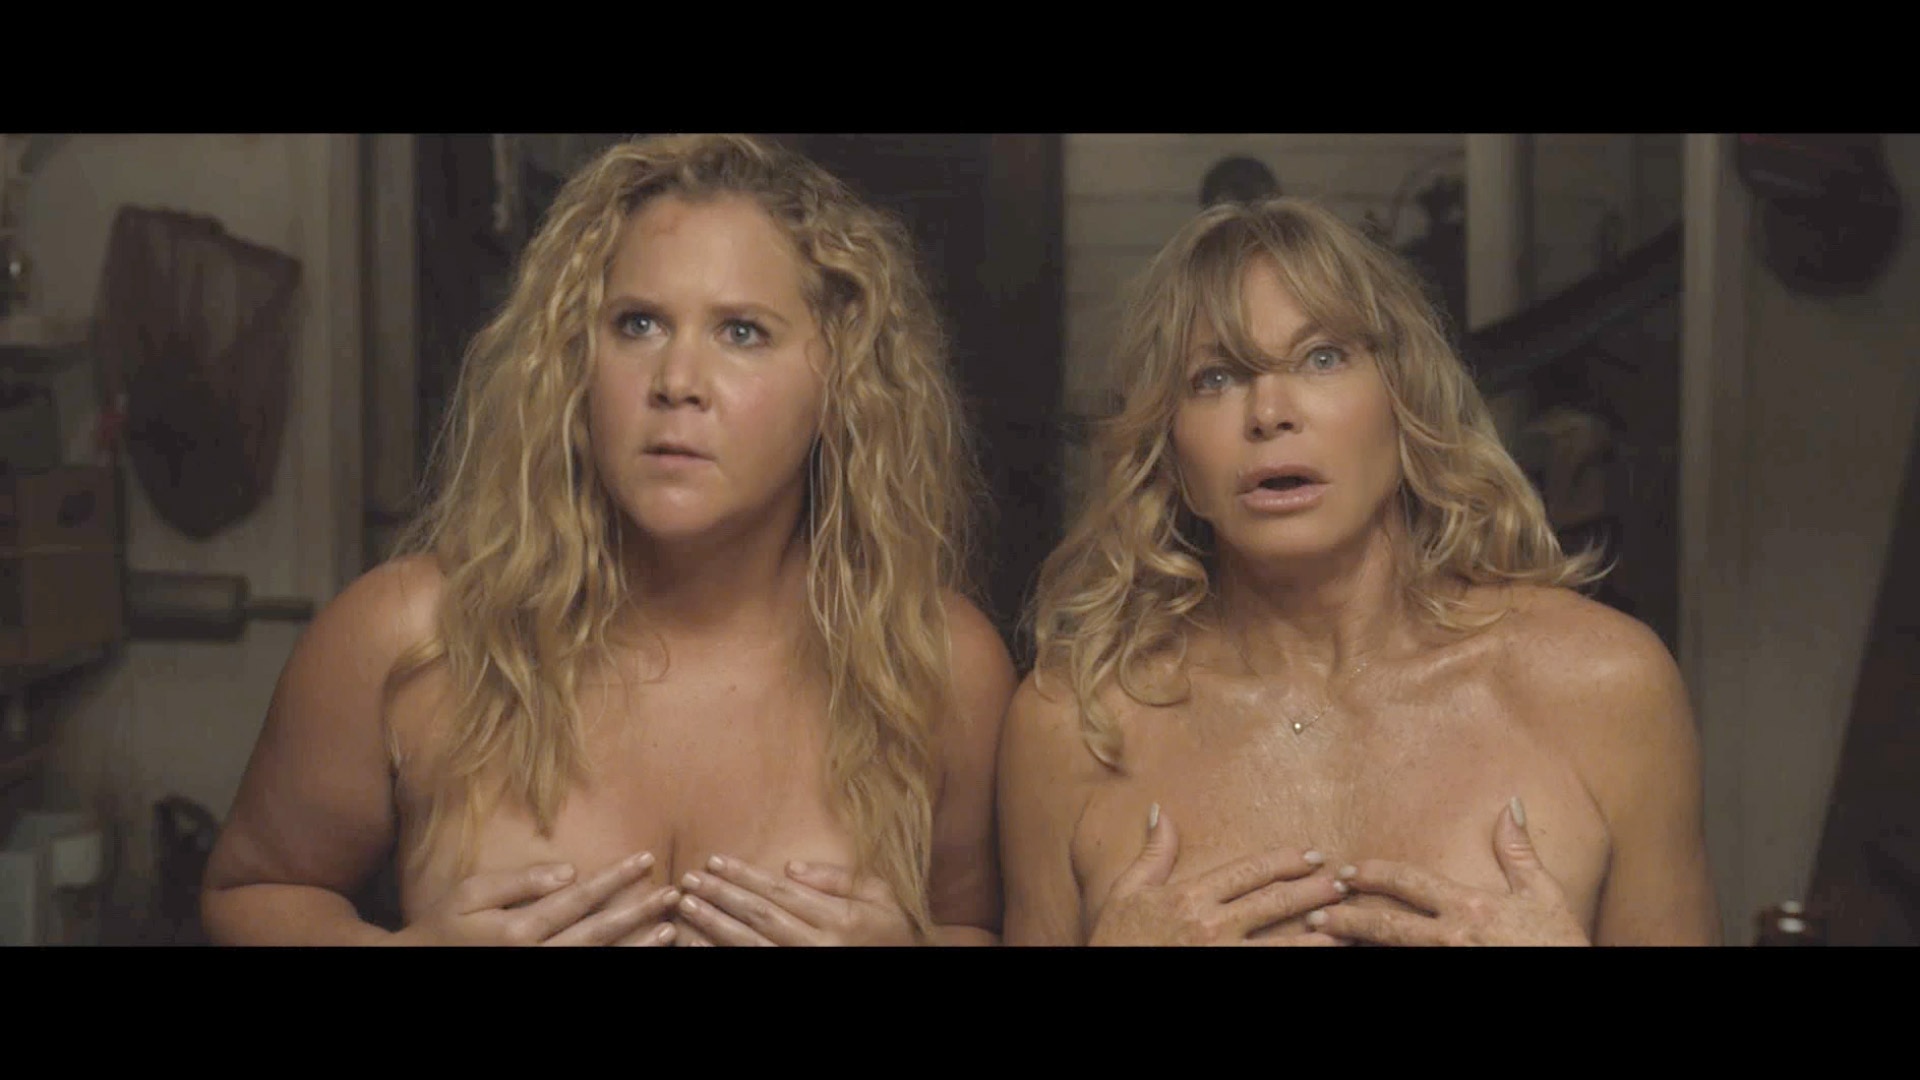 christopher kolar recommends amy schumer naked video pic